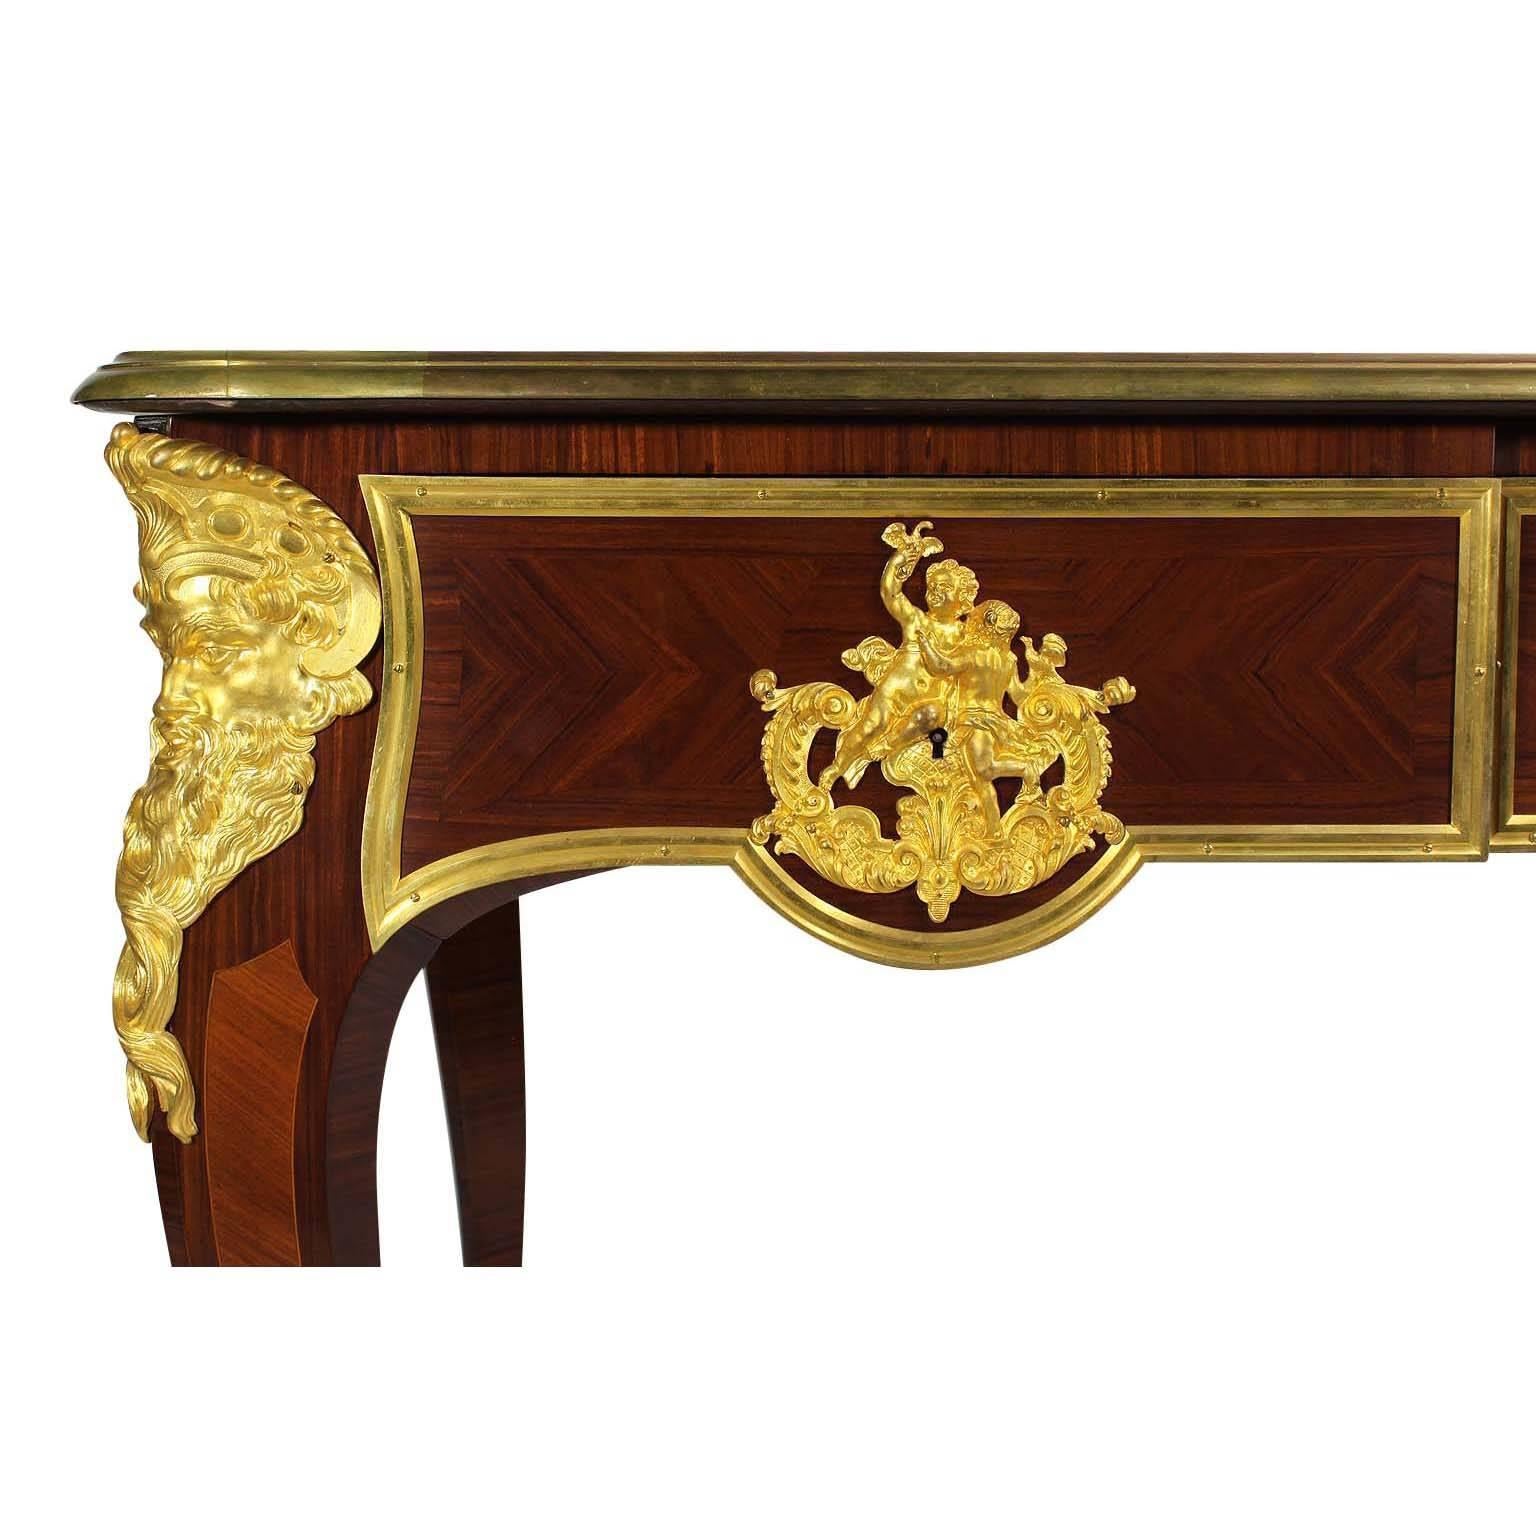 Carved French 19th Century Louis XV Style Ormolu-Mounted Bureau Plat Desk For Sale